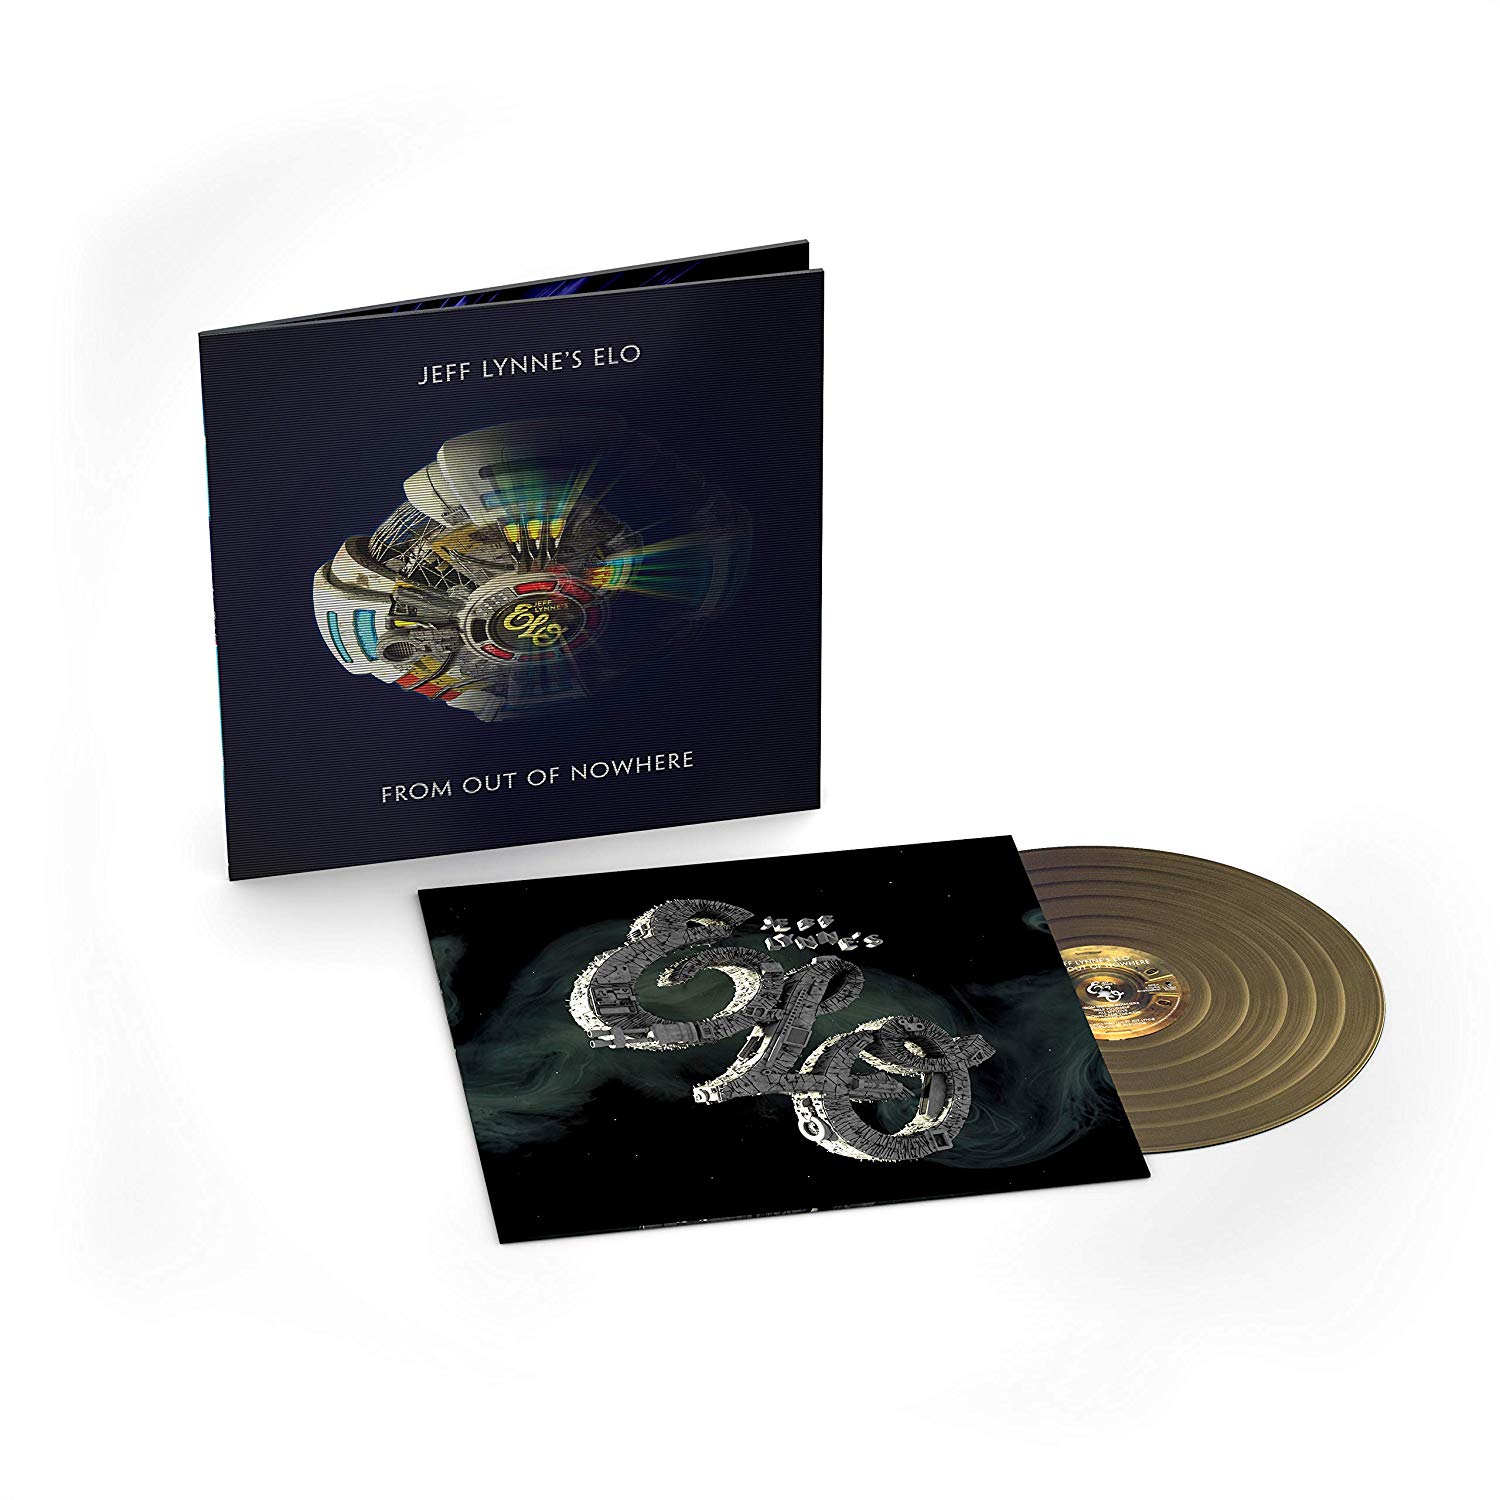 JEFF LYNNE'S ELO / ジェフ・リンズELO / FROM OUT OF NOWHERE (DELUXE GOLD COLORED 180G LP)